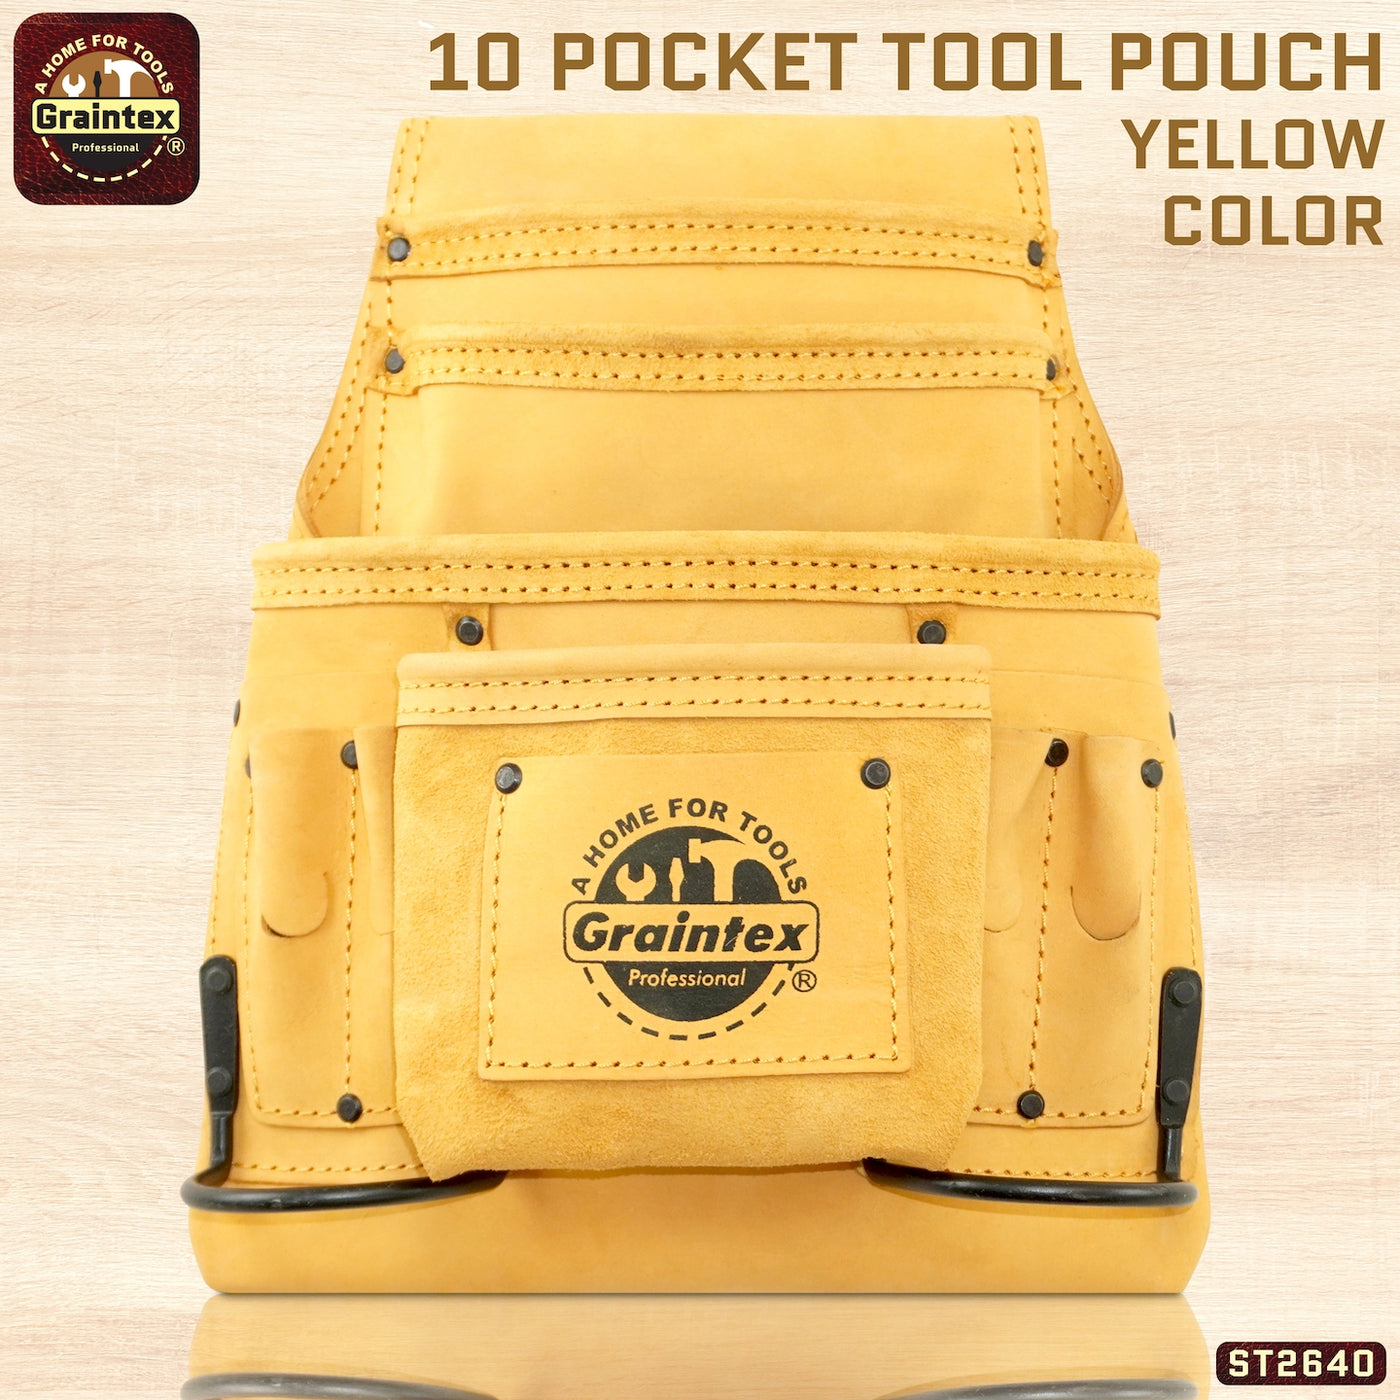 ST2640 :: 10 Pocket Nail & Tool Pouch Yellow Color Top Grain Leather